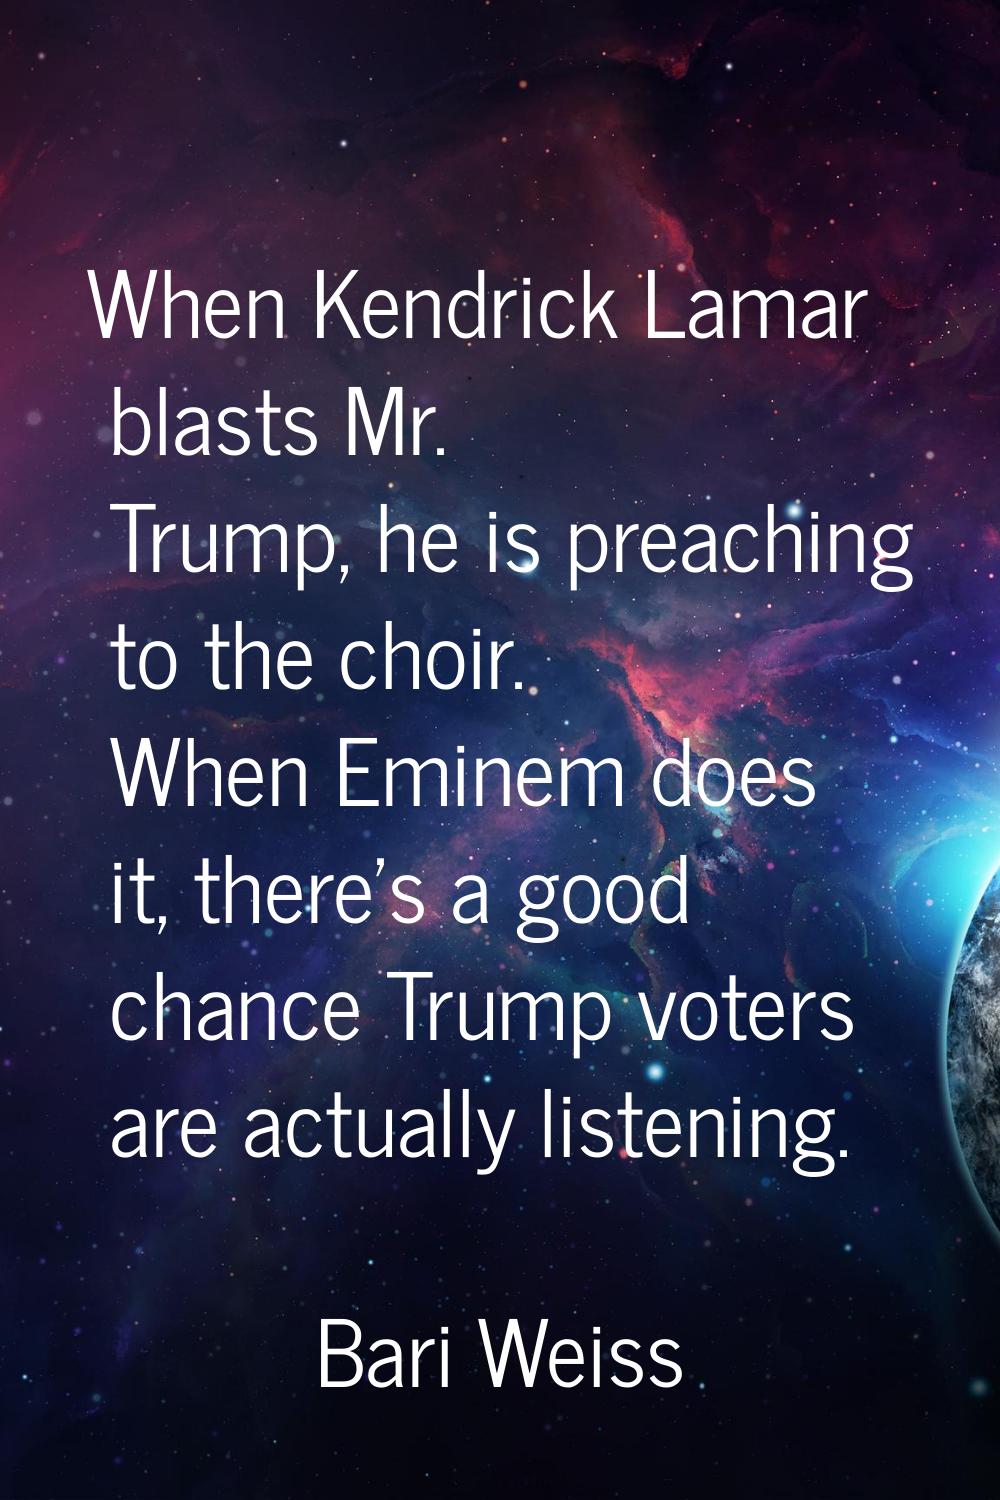 When Kendrick Lamar blasts Mr. Trump, he is preaching to the choir. When Eminem does it, there's a 